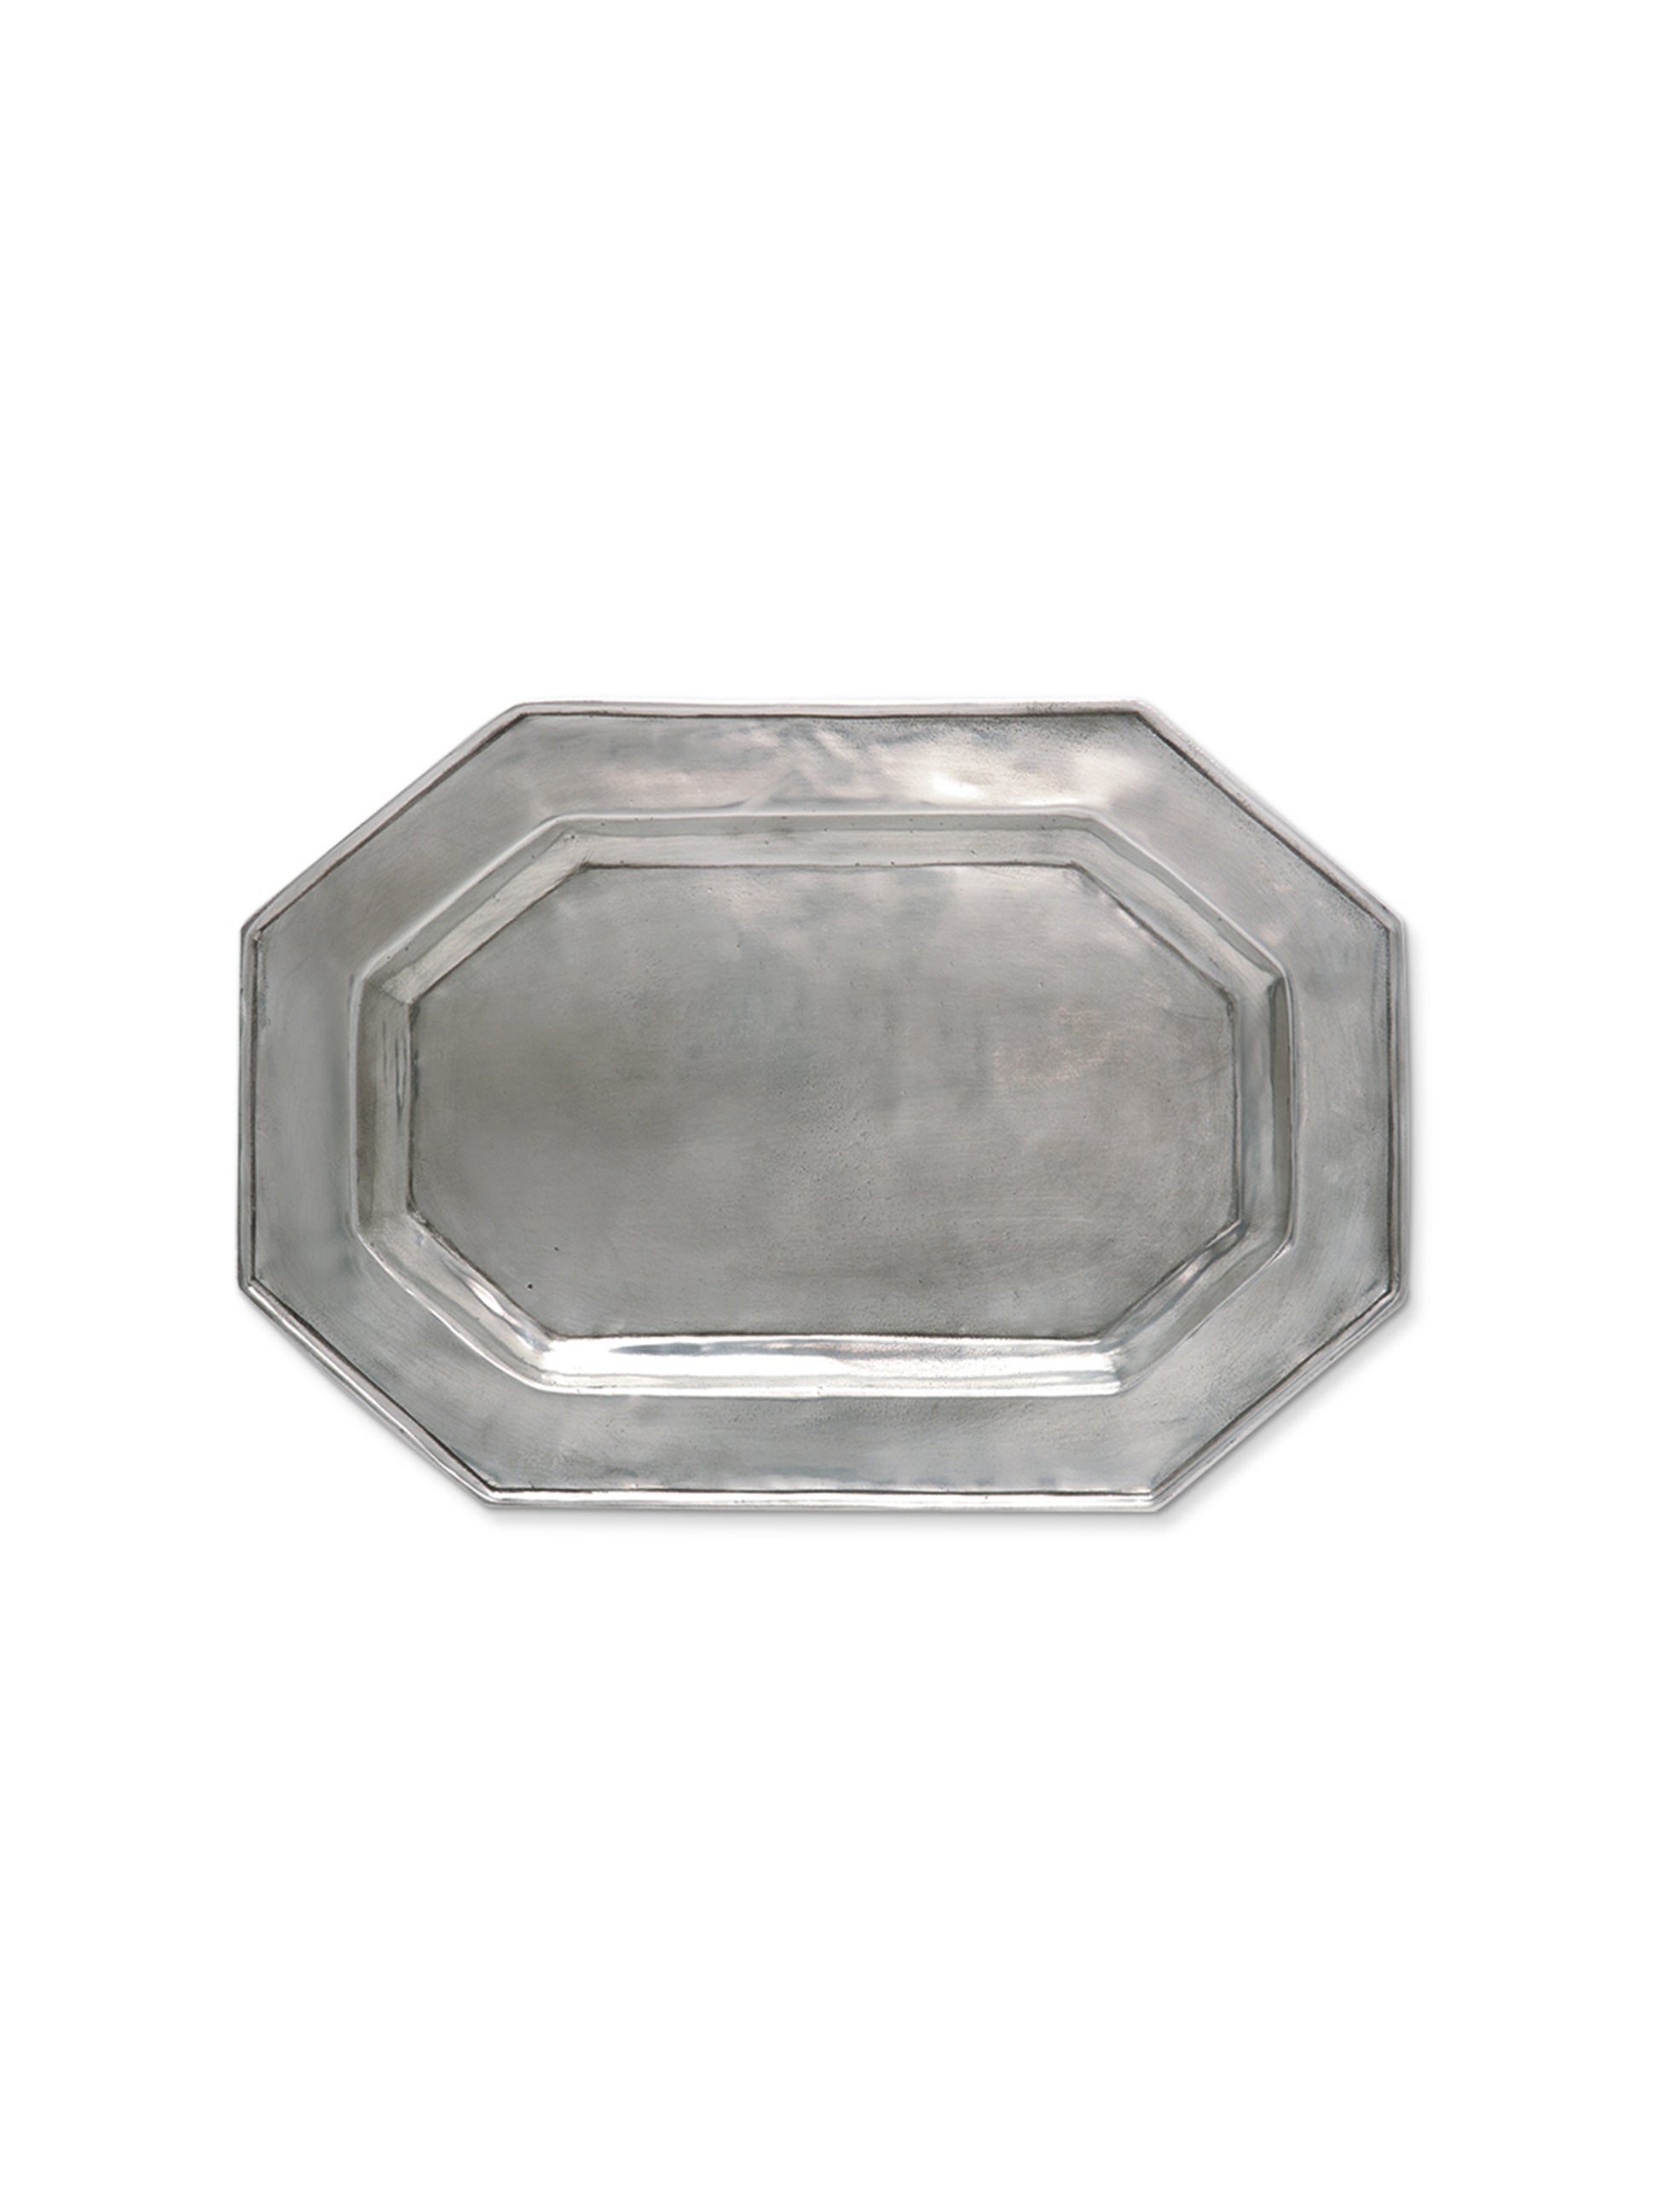 MATCH Pewter Octagonal Tray Weston Table